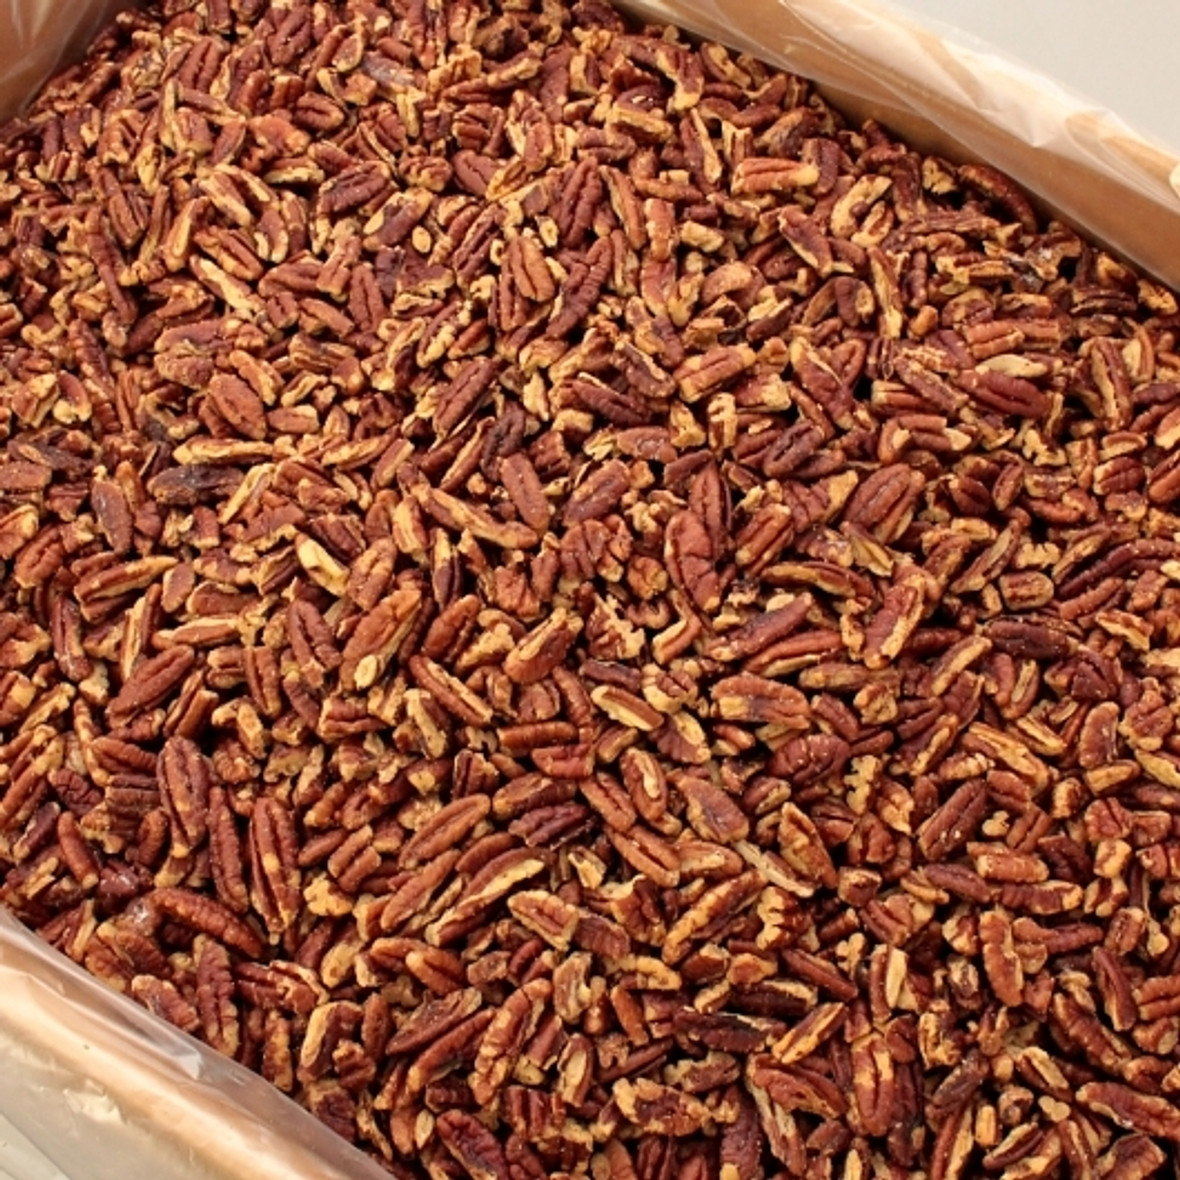 Commodity Fancy Roasted Pecan Pieces, 30 Pound, 1 Per Case